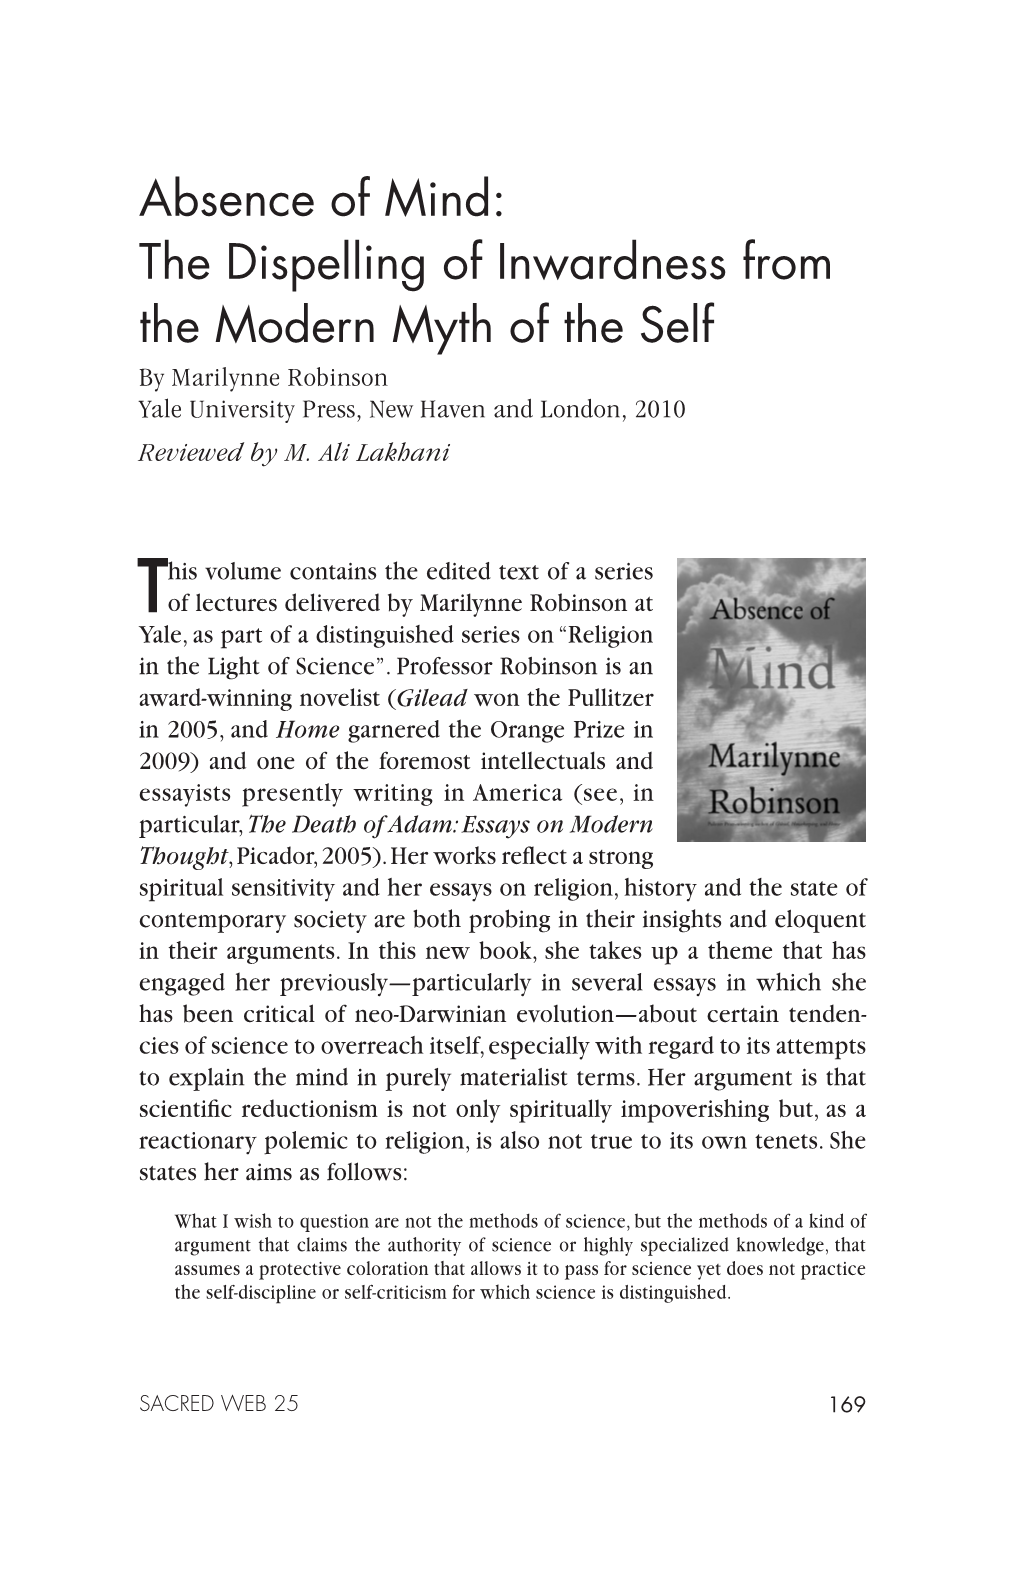 The Dispelling of Inwardness from the Modern Myth of the Self by Marilynne Robinson Yale University Press, New Haven and London, 2010 Reviewed by M